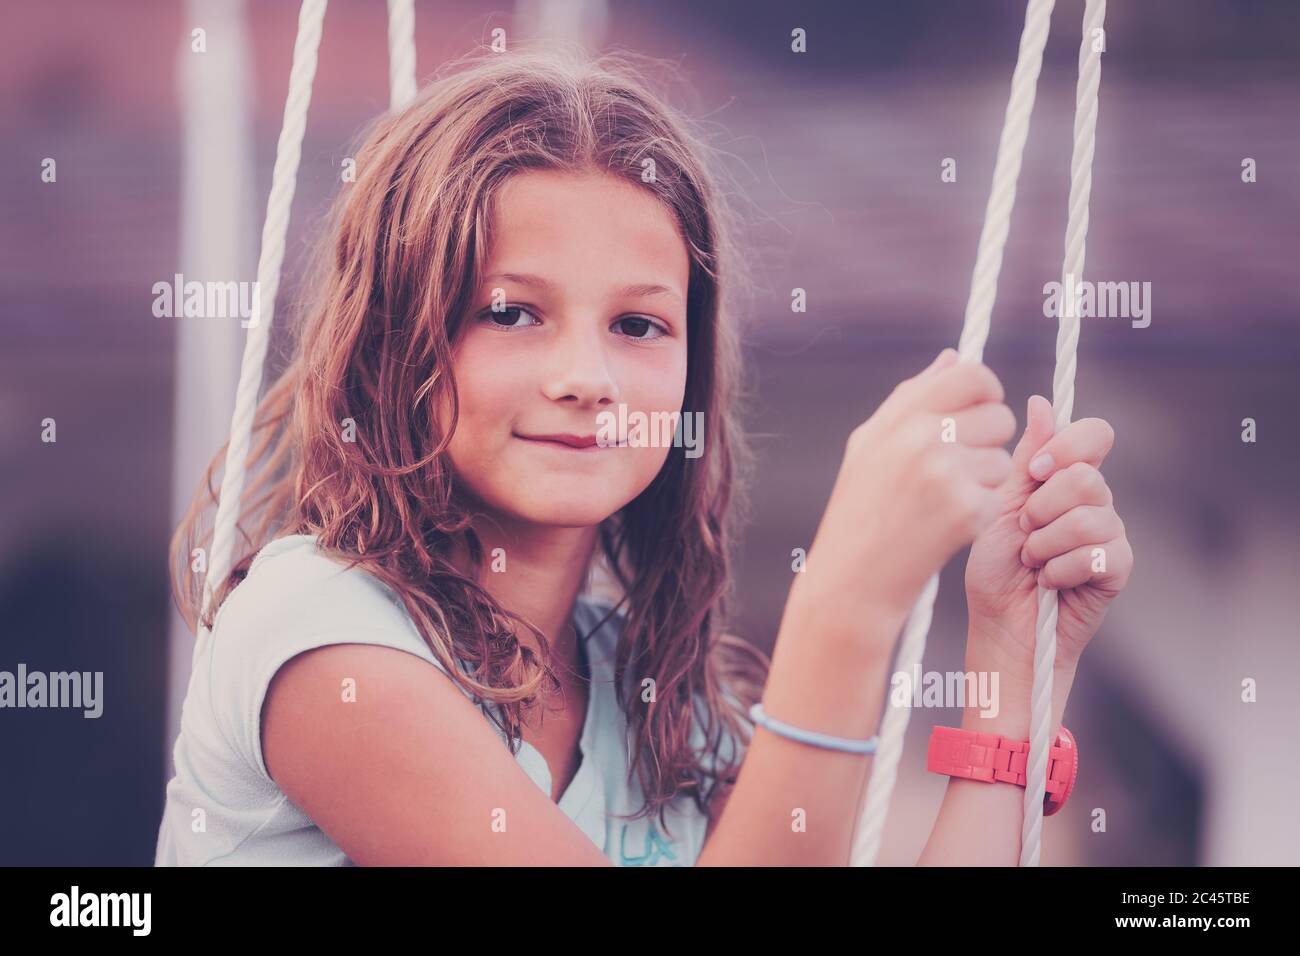 Portrait of young Caucasian girl with brown hair sitting on a swing looking at camera Stock Photo